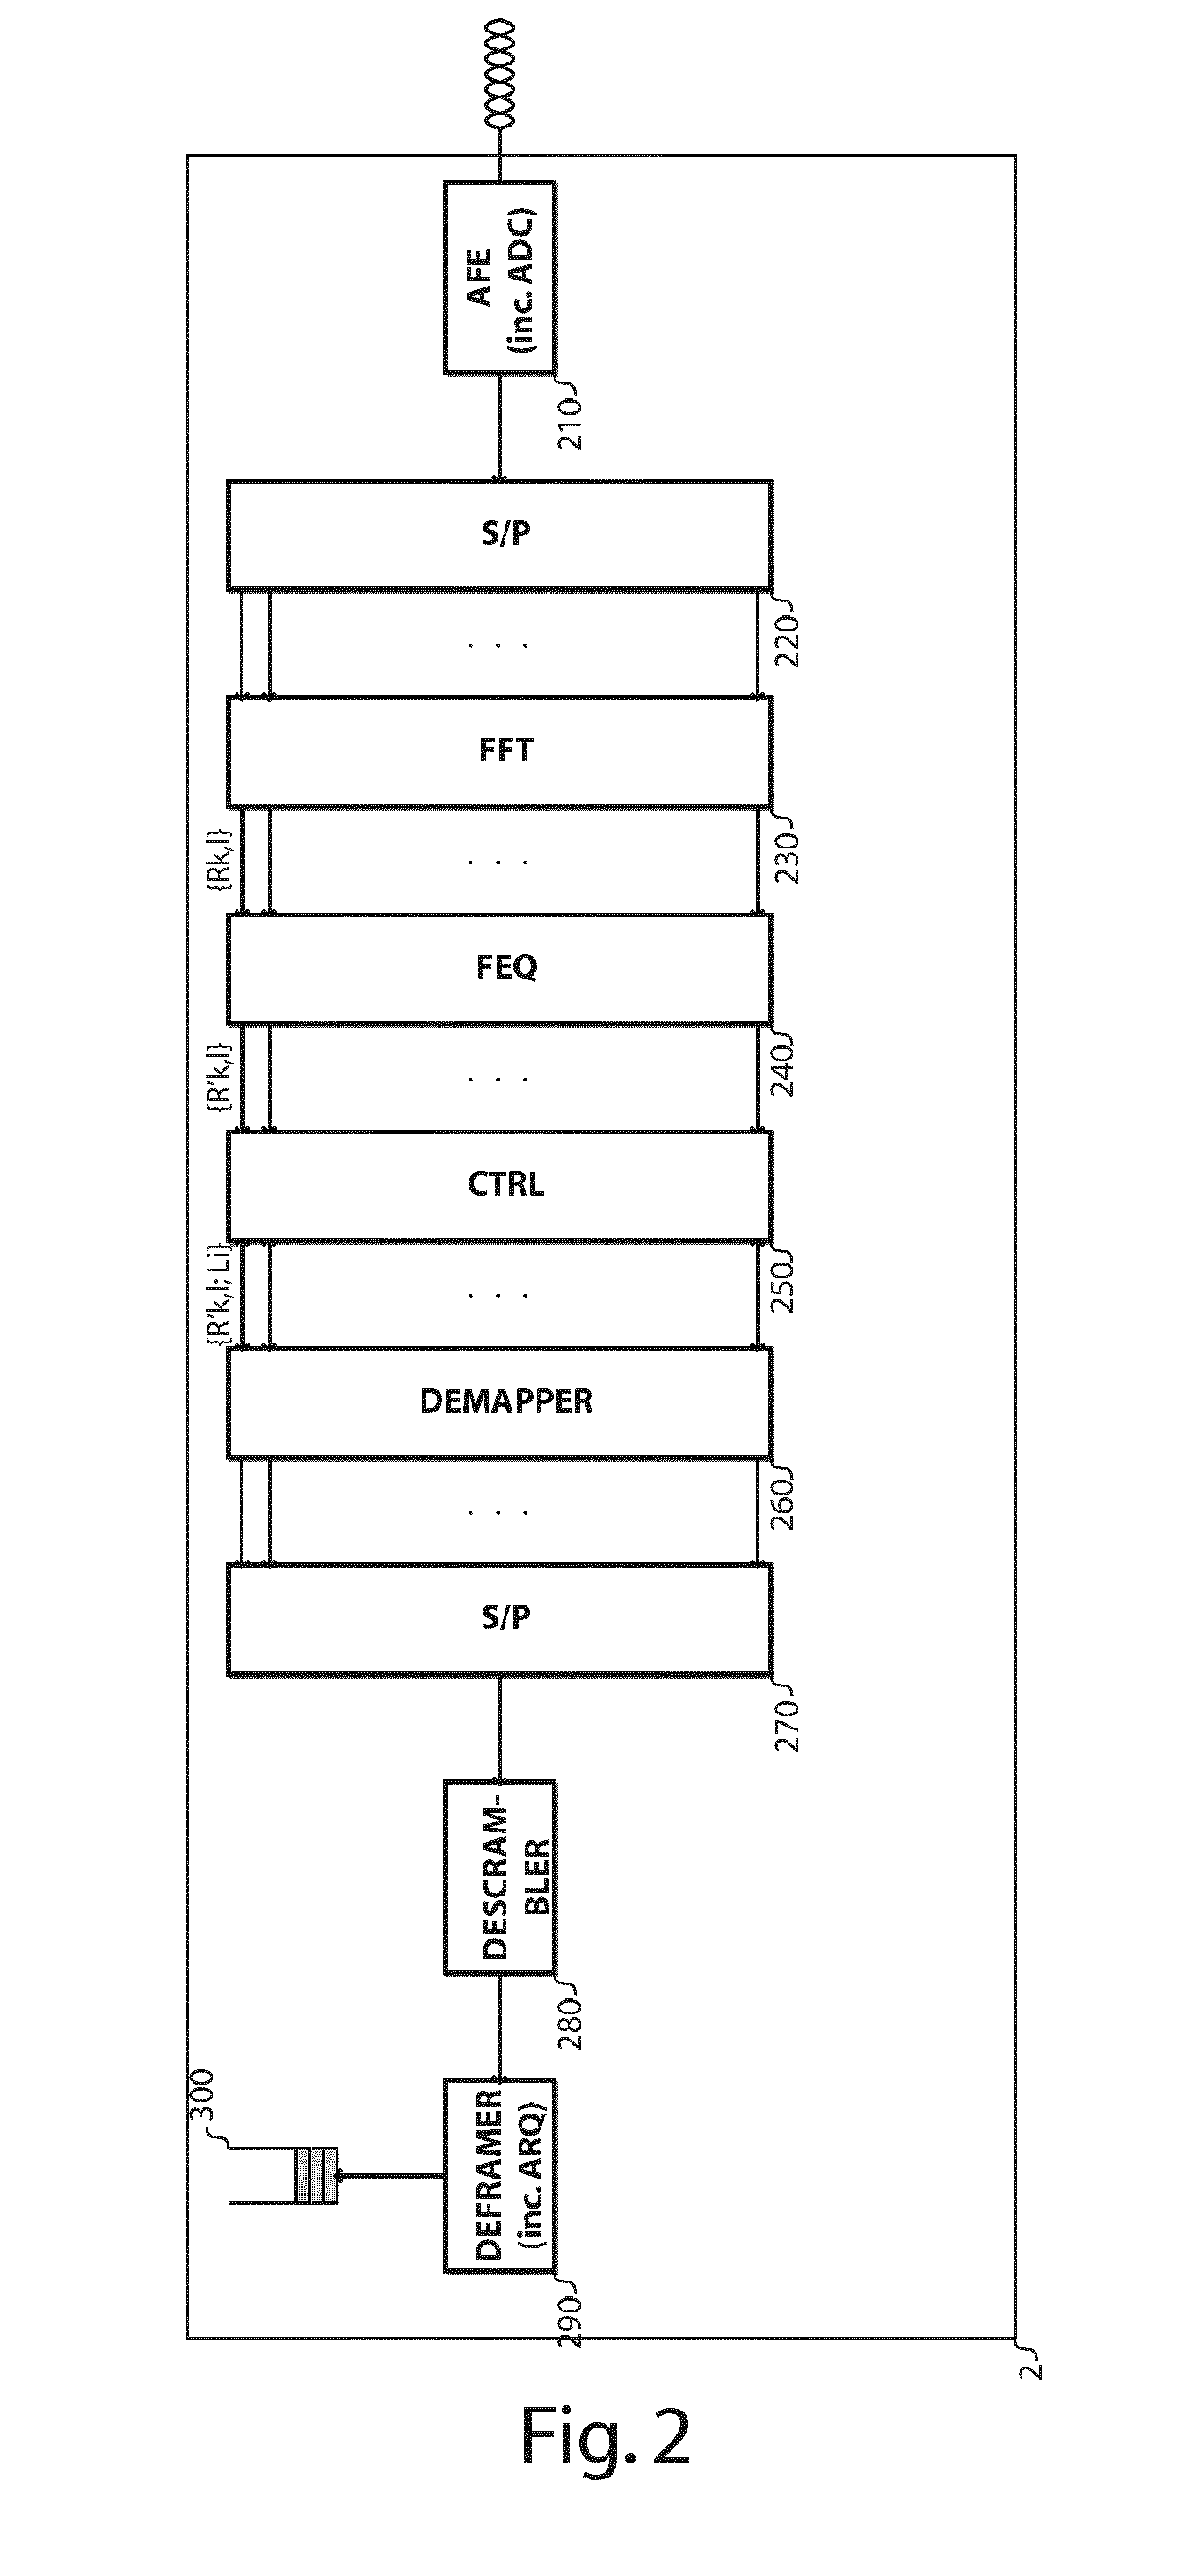 Hierarchical and adaptive multi-carrier digital modulation and demodulation